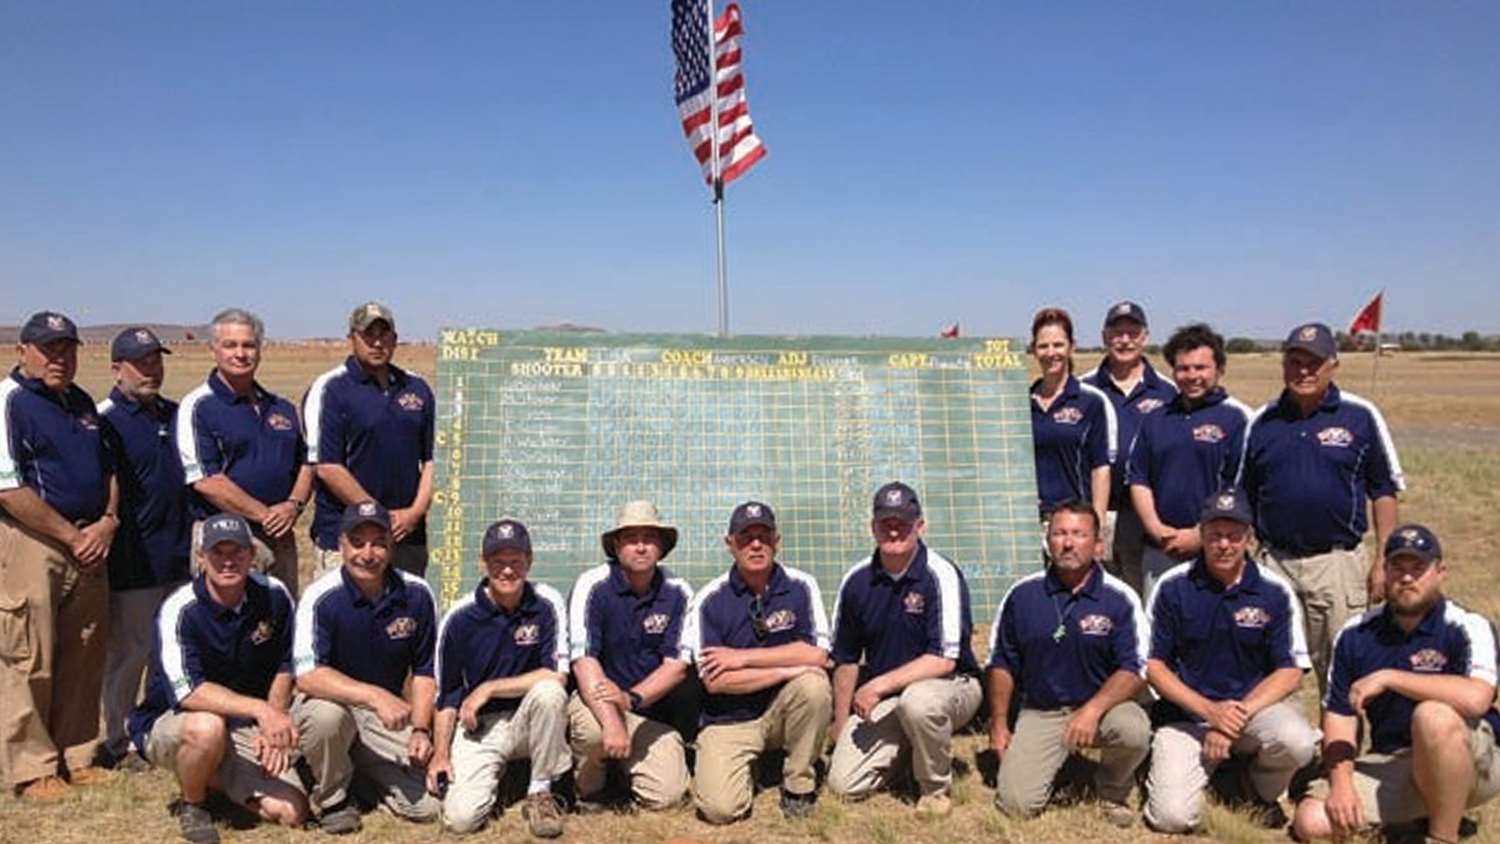 Members of one of several U.S. teams, standing next to their match scores in South Africa. Circa 2013